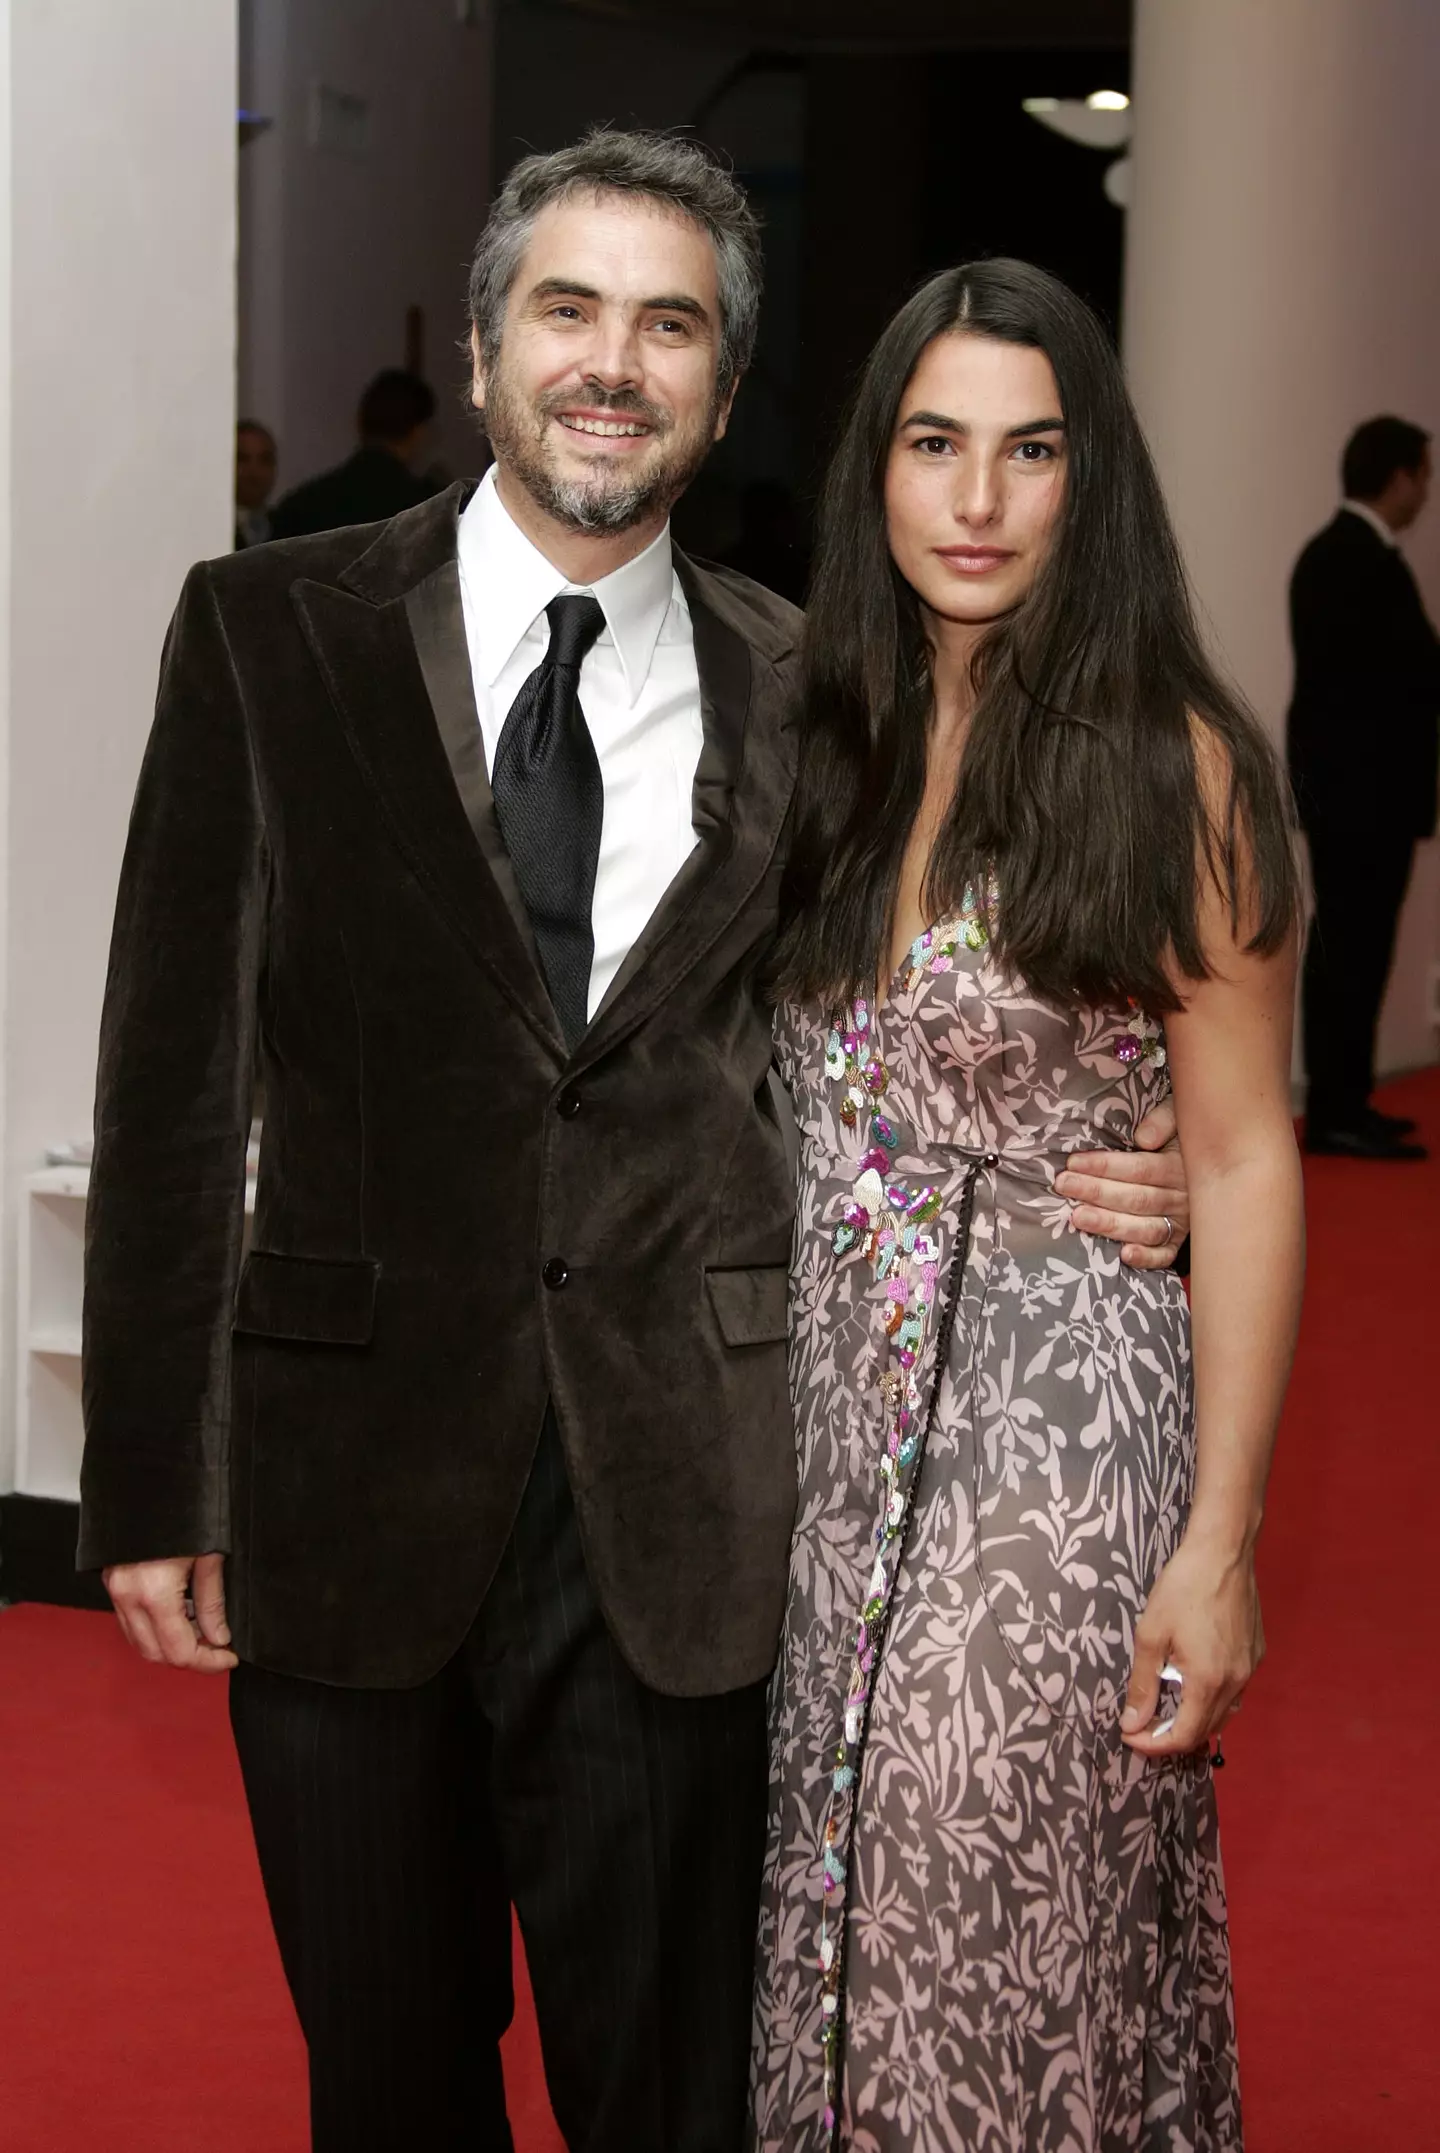 Alfonso Cuarón was marrried to Annalisa Bugliani between the years of 2001 and 2008 (